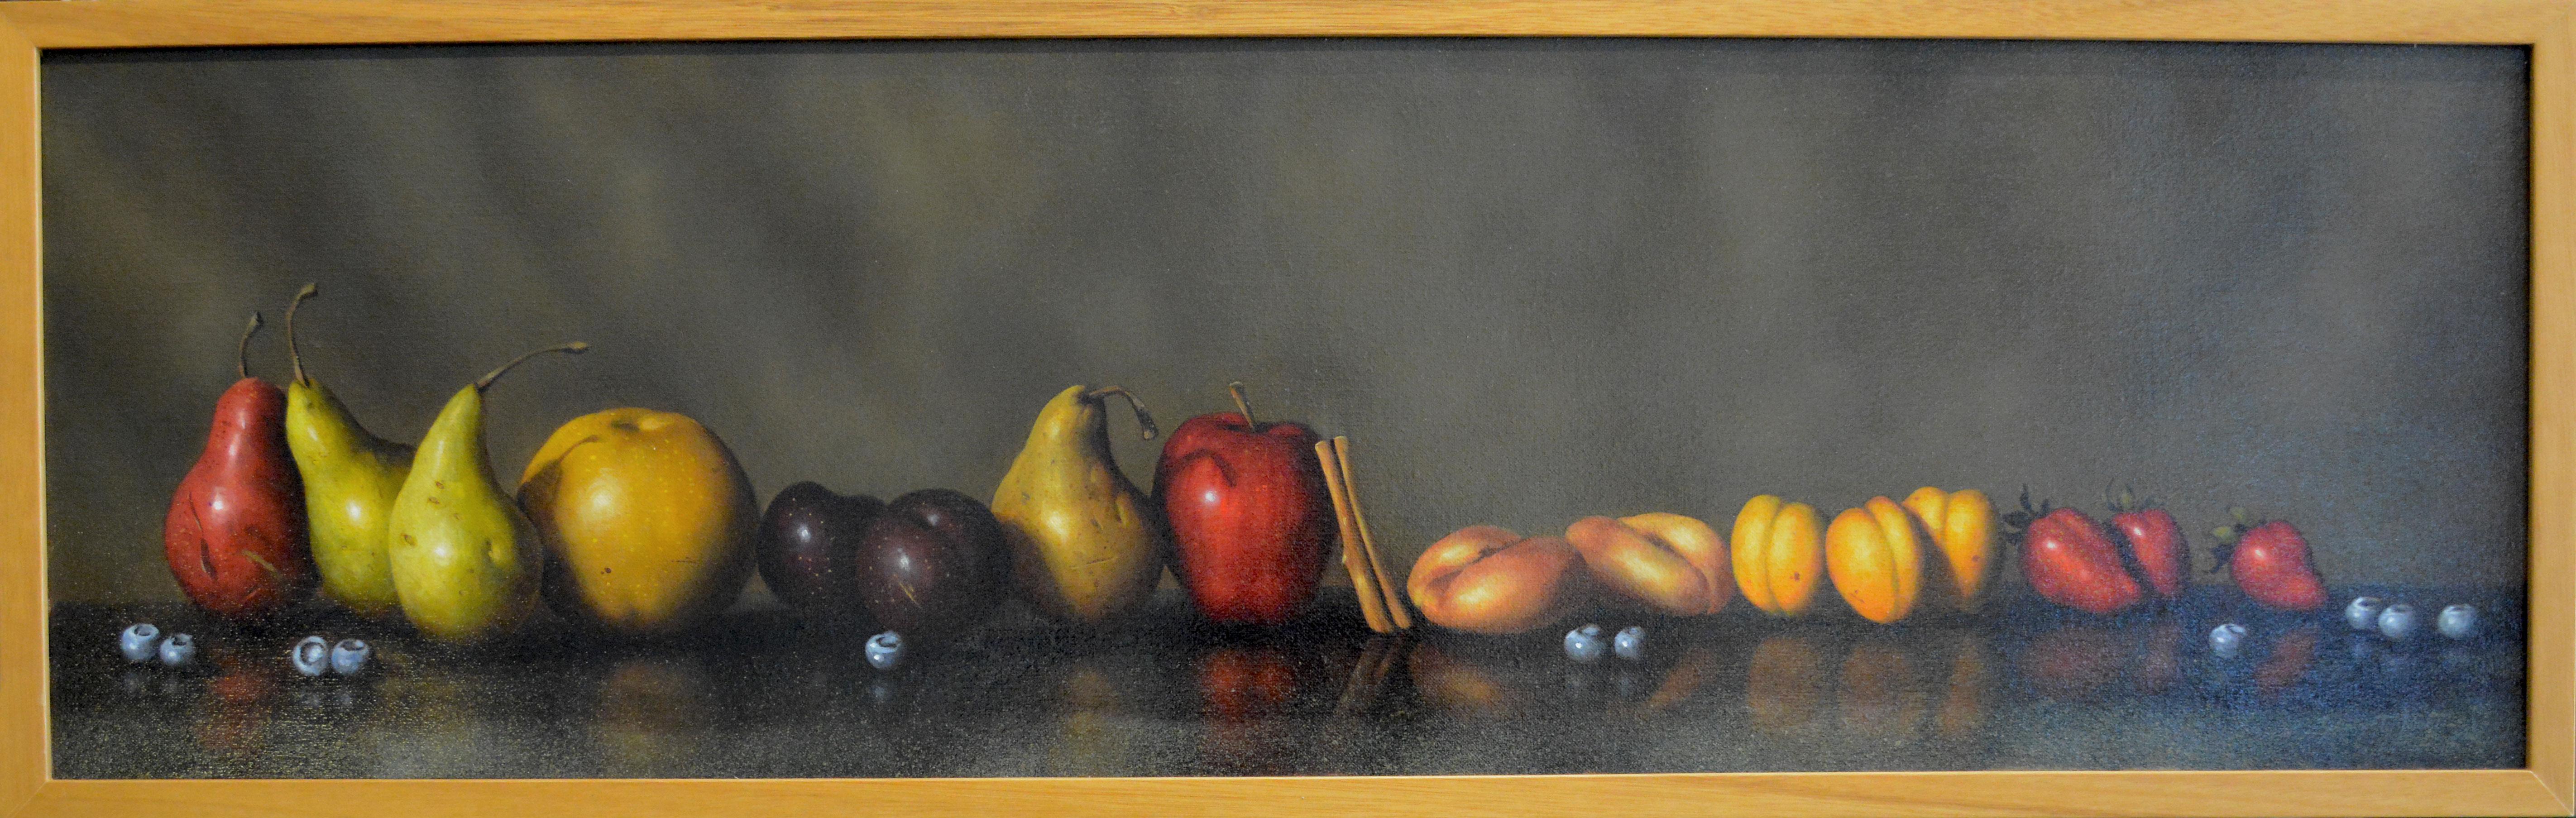 Clinton Hobart Still-Life Painting - "Still Life with Fruit" - Large Contemporary Framed Painting